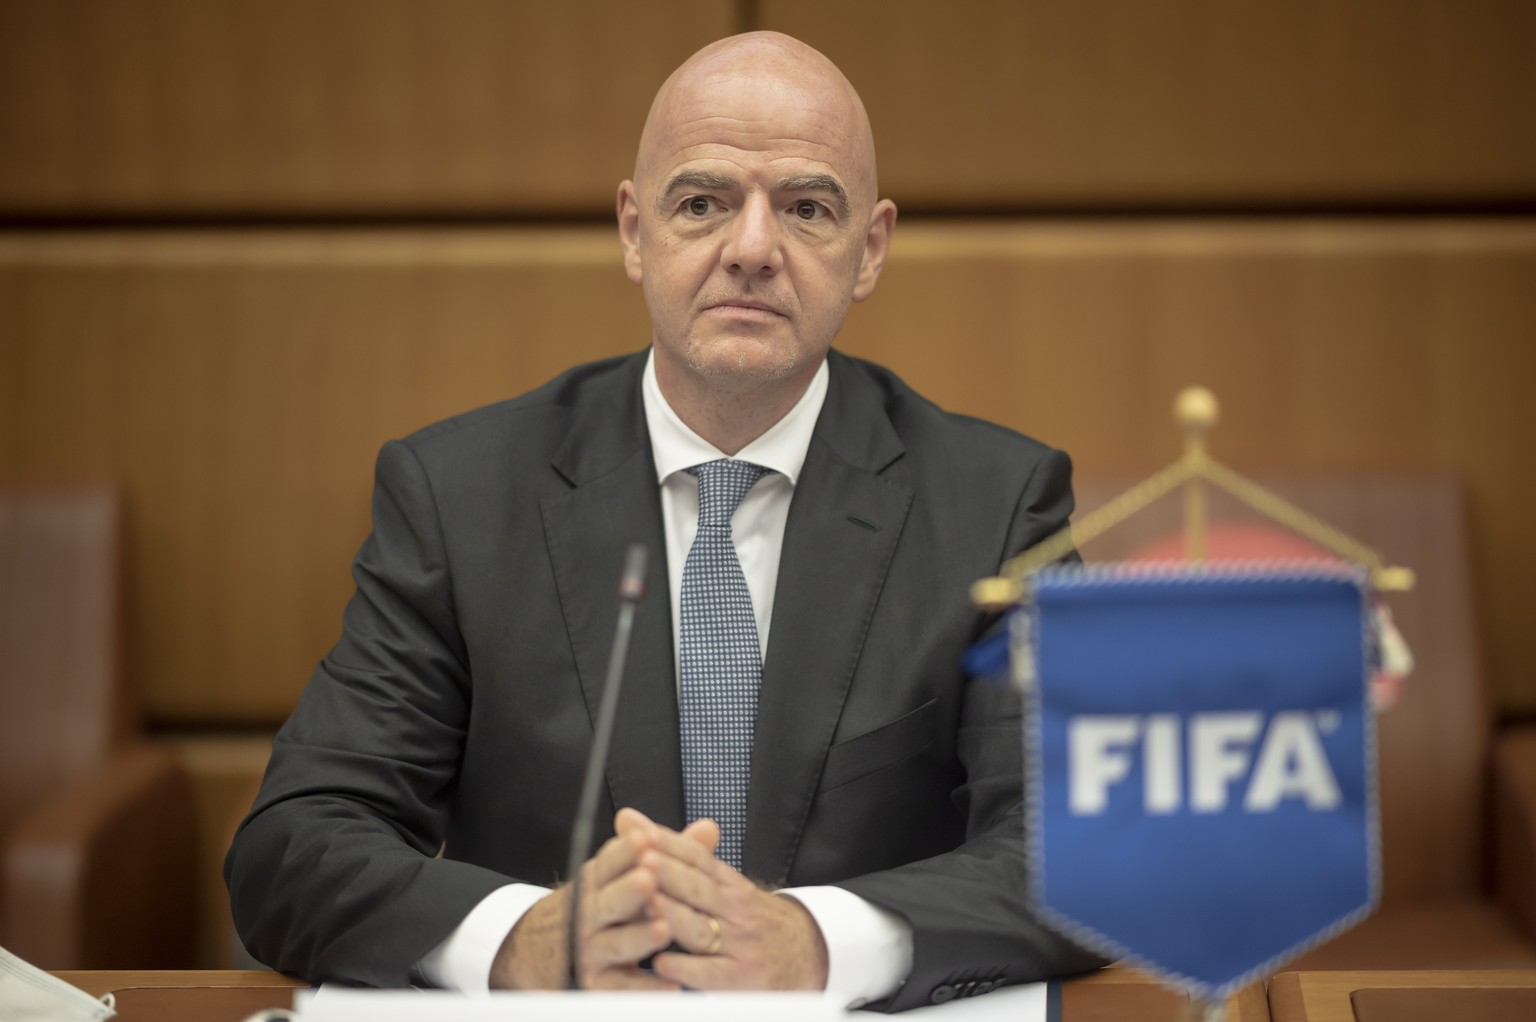 epa08778125 (FILE) - FIFA President Gianni Infantino arrives to sign a memorandum of understanding (MOU) with Ghada Waly, Executive Director of the United Nations Office on Drugs and Crime (UNODC) and ...